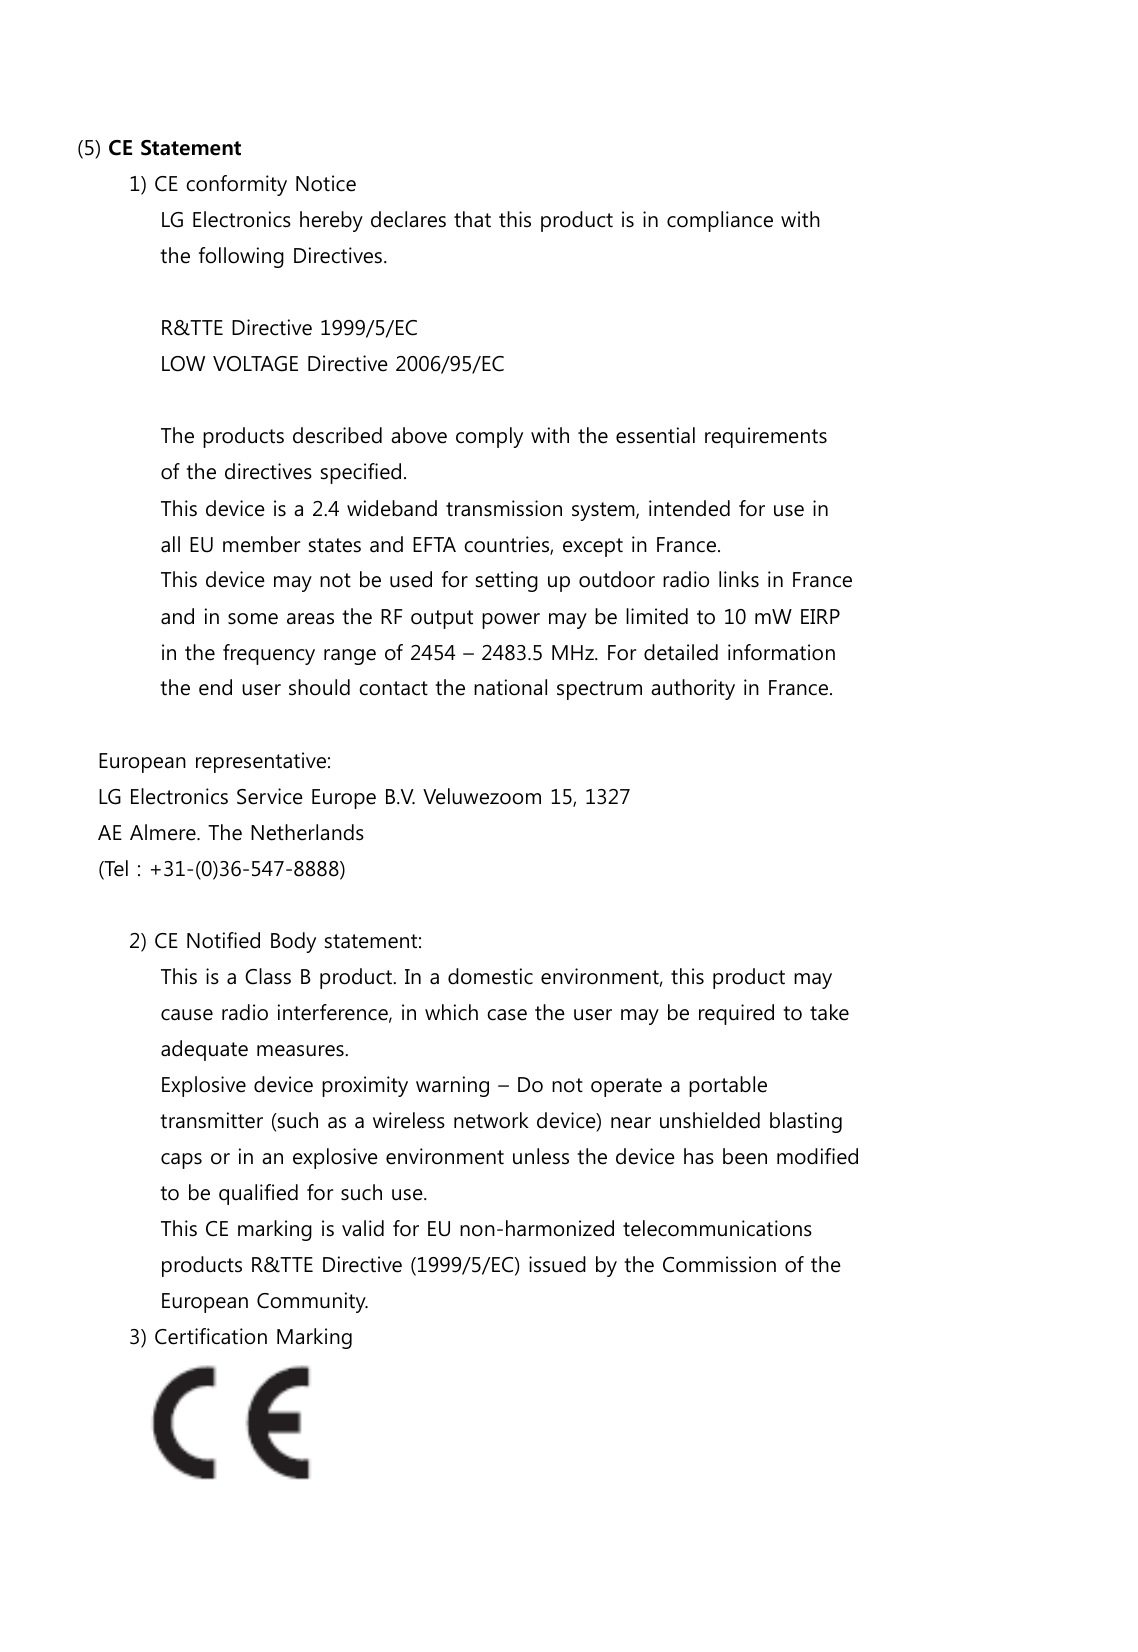                                         (5) CE Statement          1) CE conformity Notice                LG Electronics hereby declares that this product is in compliance with                  the following Directives.                     R&amp;TTE Directive 1999/5/EC                 LOW VOLTAGE Directive 2006/95/EC                      The products described above comply with the essential requirements                  of the directives specified.                  This device is a 2.4 wideband transmission system, intended for use in                all EU member states and EFTA countries, except in France.                  This device may not be used for setting up outdoor radio links in France                  and in some areas the RF output power may be limited to 10 mW EIRP                in the frequency range of 2454 – 2483.5 MHz. For detailed information                  the end user should contact the national spectrum authority in France.         European representative:     LG Electronics Service Europe B.V. Veluwezoom 15, 1327     AE Almere. The Netherlands      (Tel : +31-(0)36-547-8888)             2) CE Notified Body statement:                This is a Class B product. In a domestic environment, this product may                  cause radio interference, in which case the user may be required to take                adequate measures.                  Explosive device proximity warning – Do not operate a portable                  transmitter (such as a wireless network device) near unshielded blasting                  caps or in an explosive environment unless the device has been modified                to be qualified for such use.                  This CE marking is valid for EU non-harmonized telecommunications                  products R&amp;TTE Directive (1999/5/EC) issued by the Commission of the                  European Community.            3) Certification Marking  